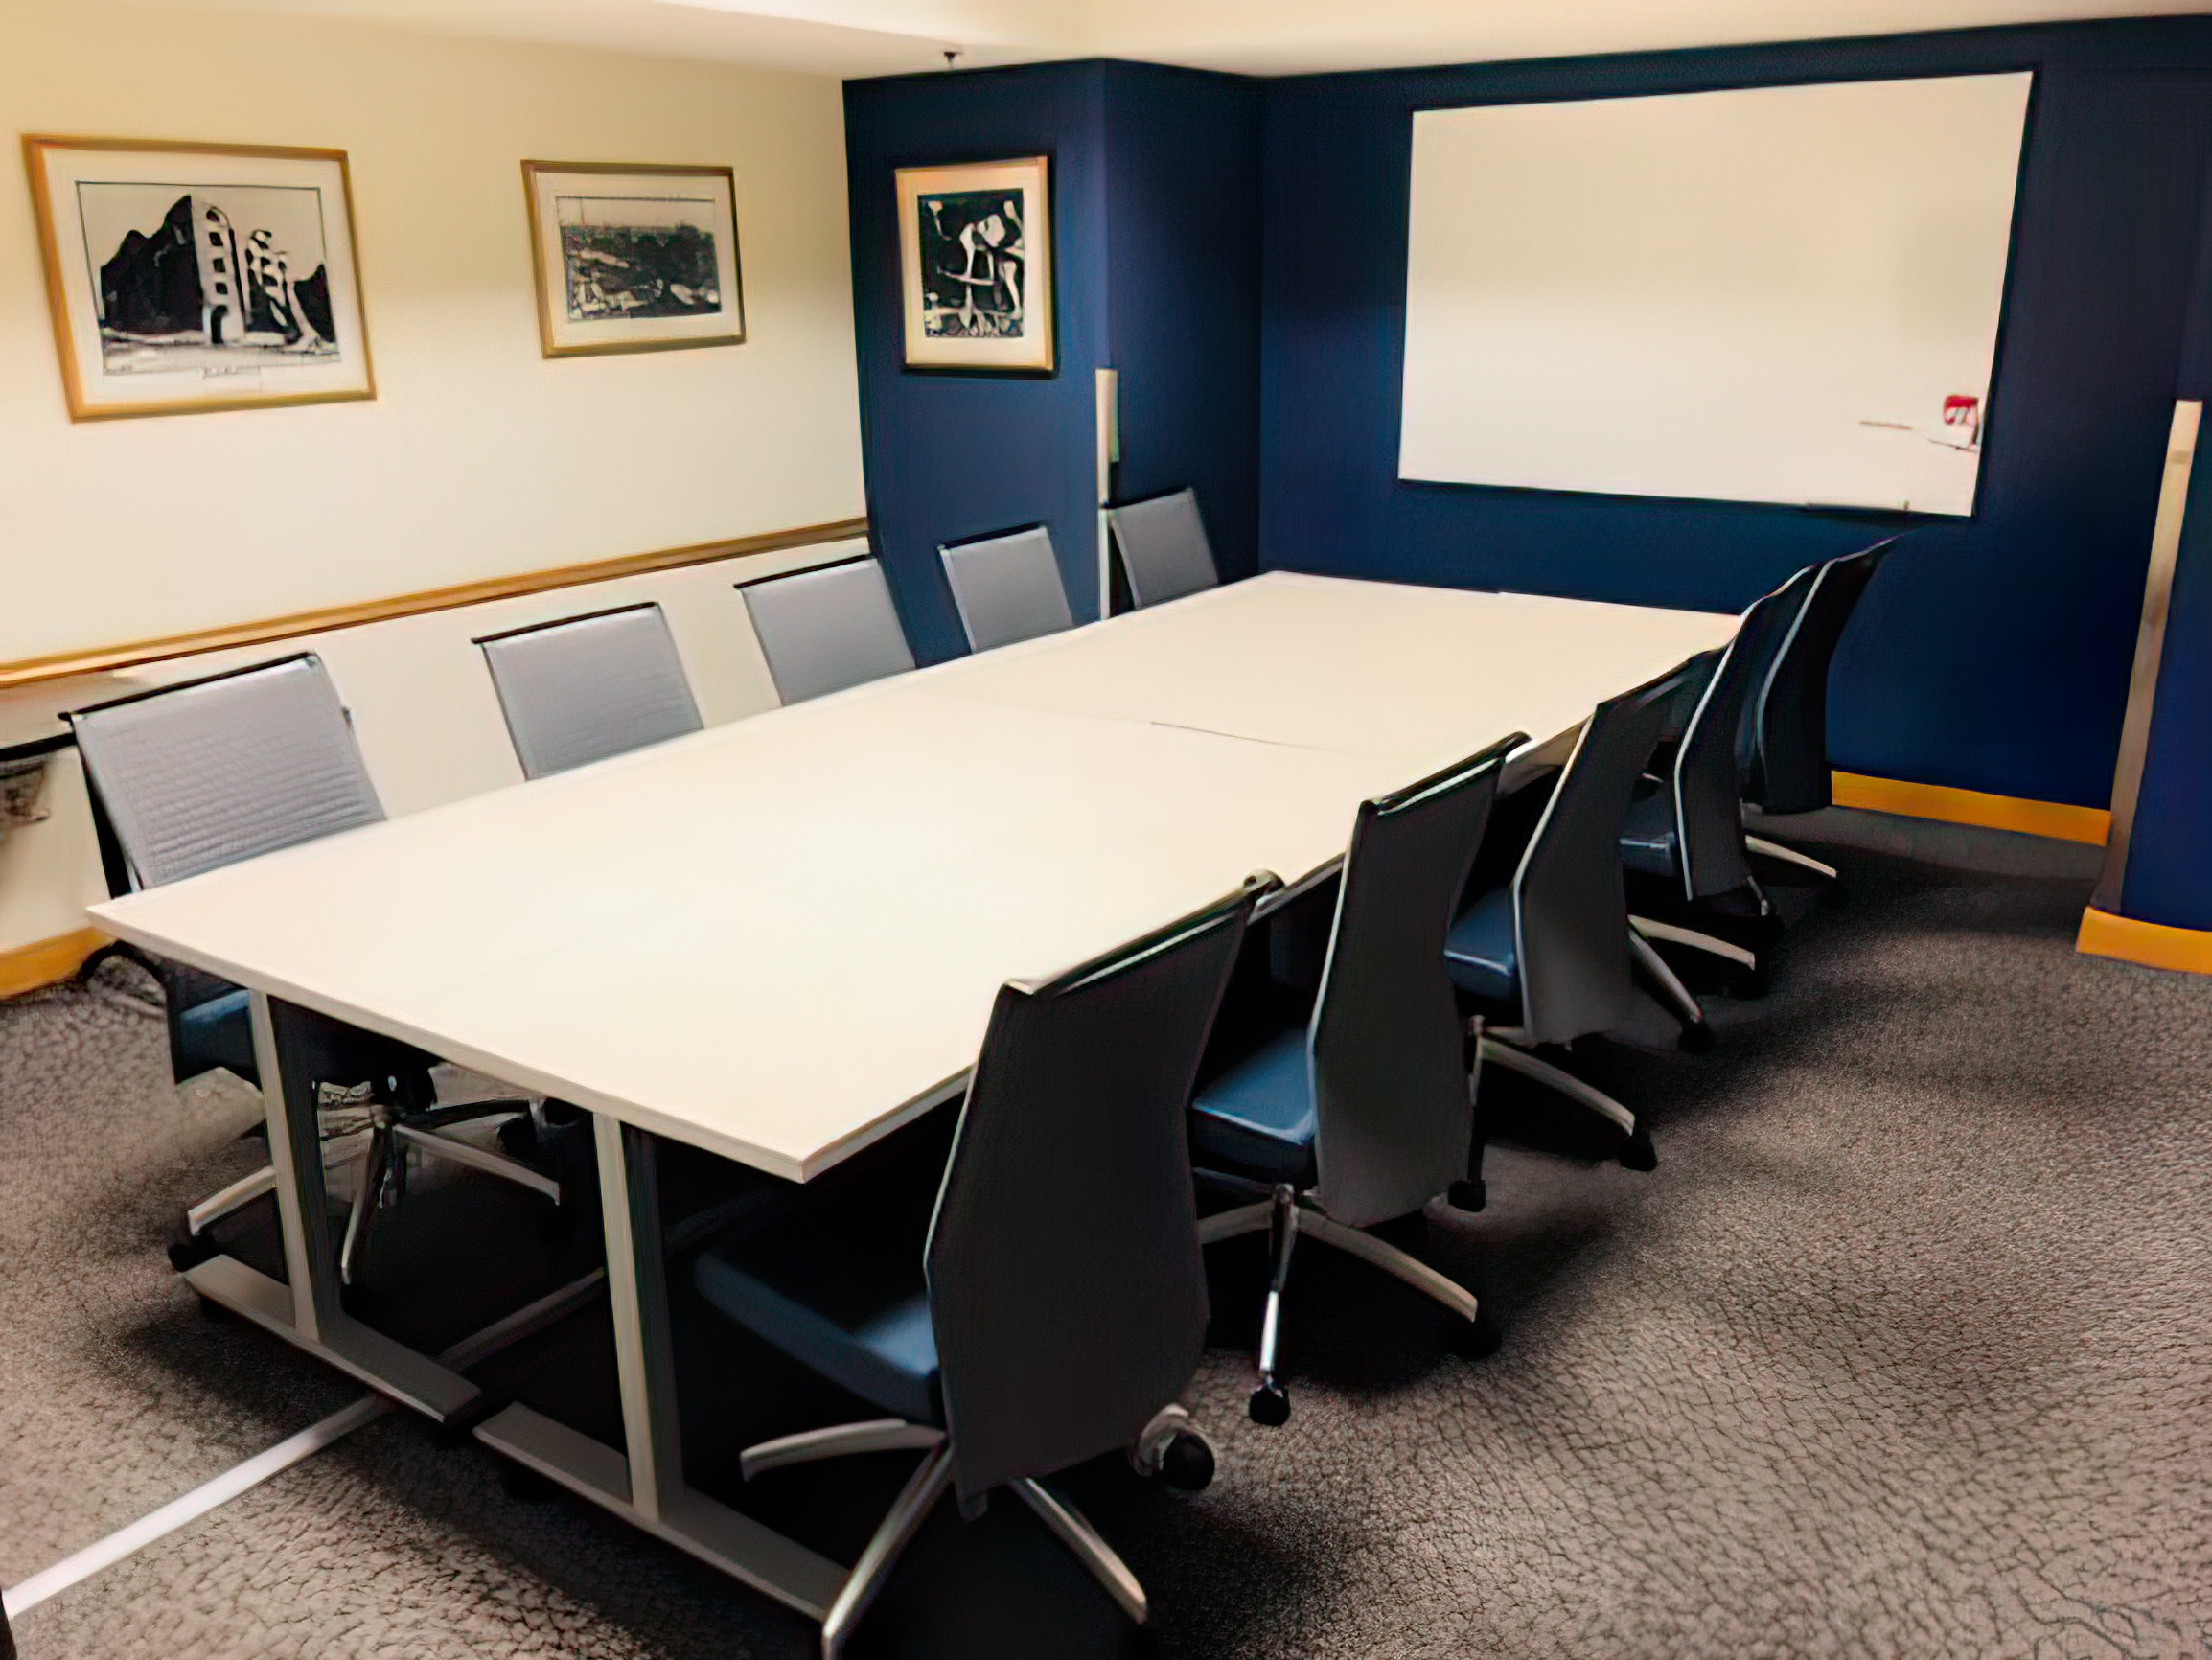 A conference table, with chairs on two sides, faces a blue wall with a whiteboard.